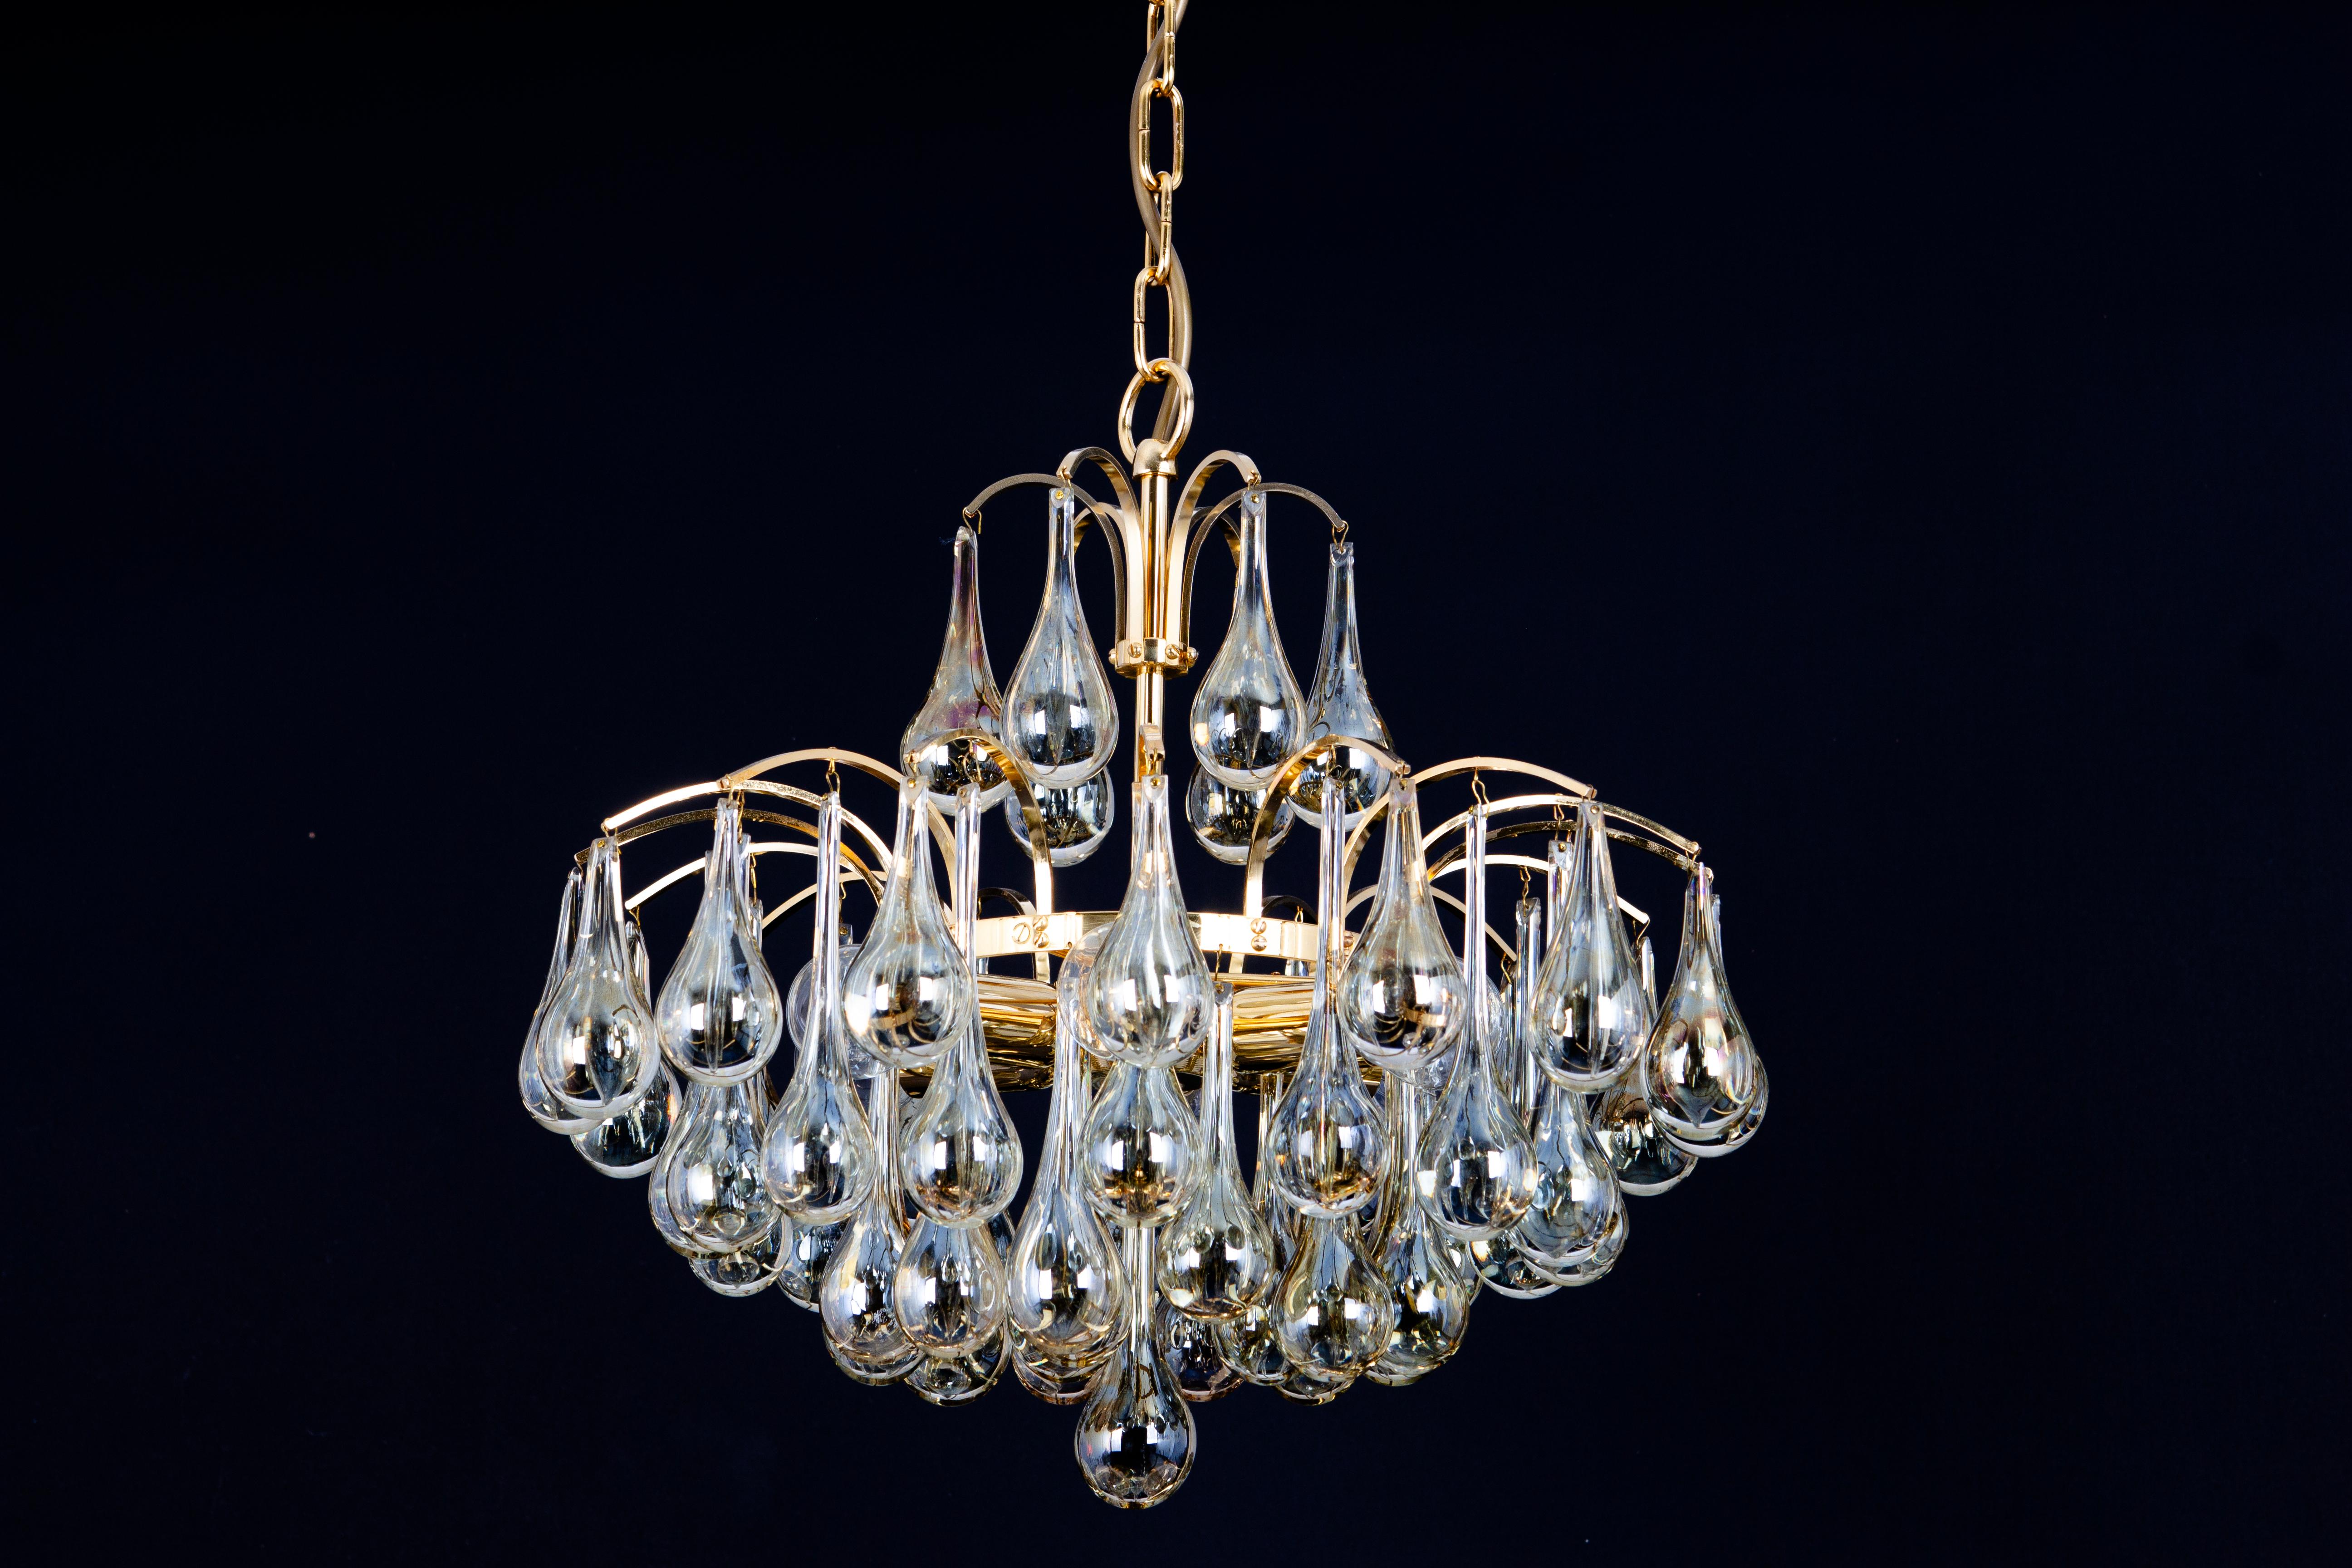 Large Murano Glass Tear Drop Chandelier, Christoph Palme, Germany, 1970s For Sale 2